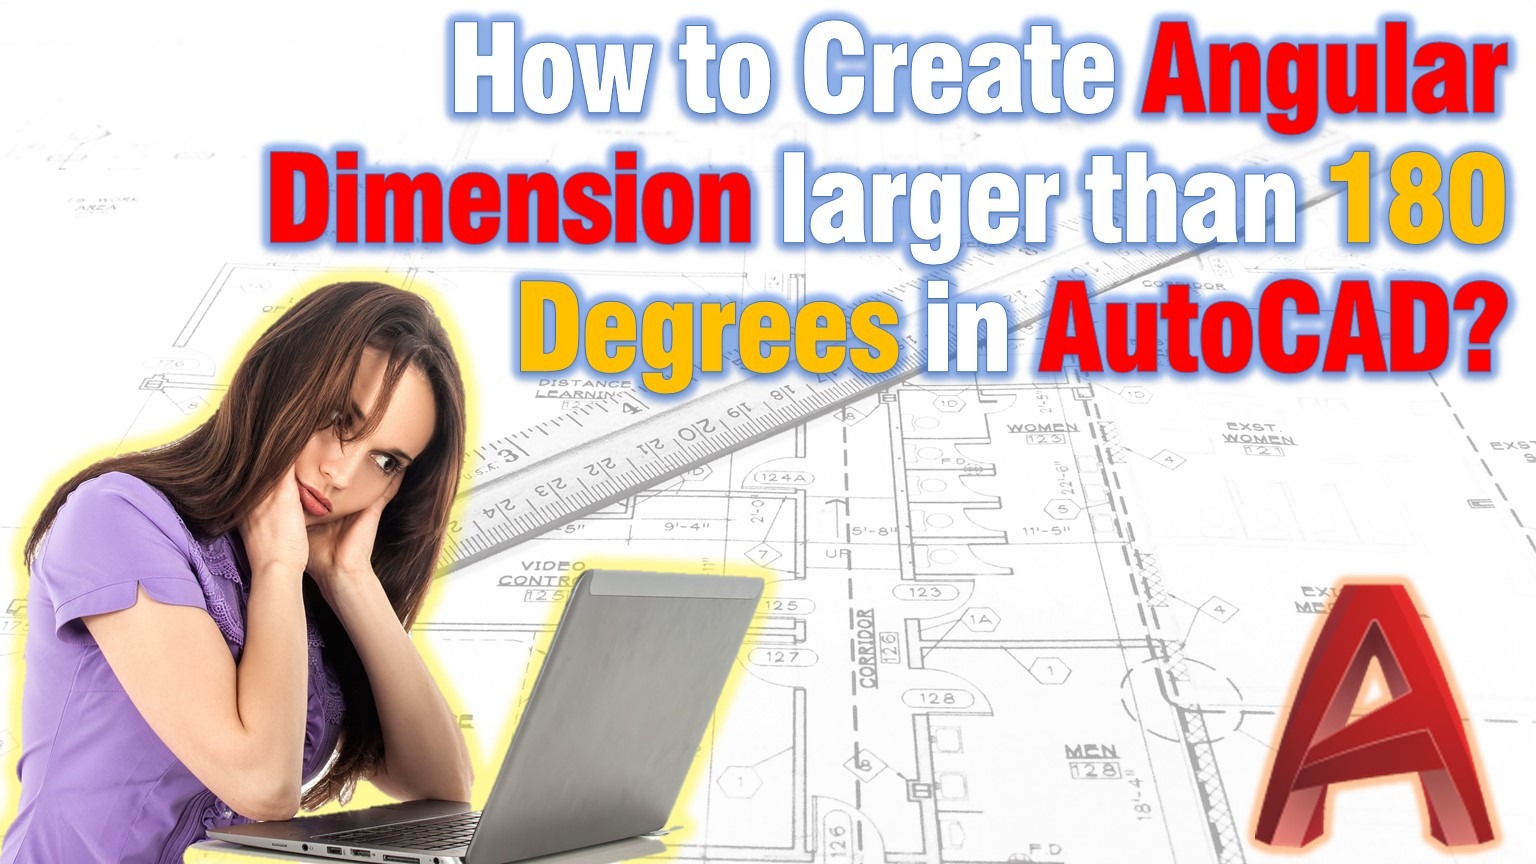 How to angular dimension larger than 180 degrees